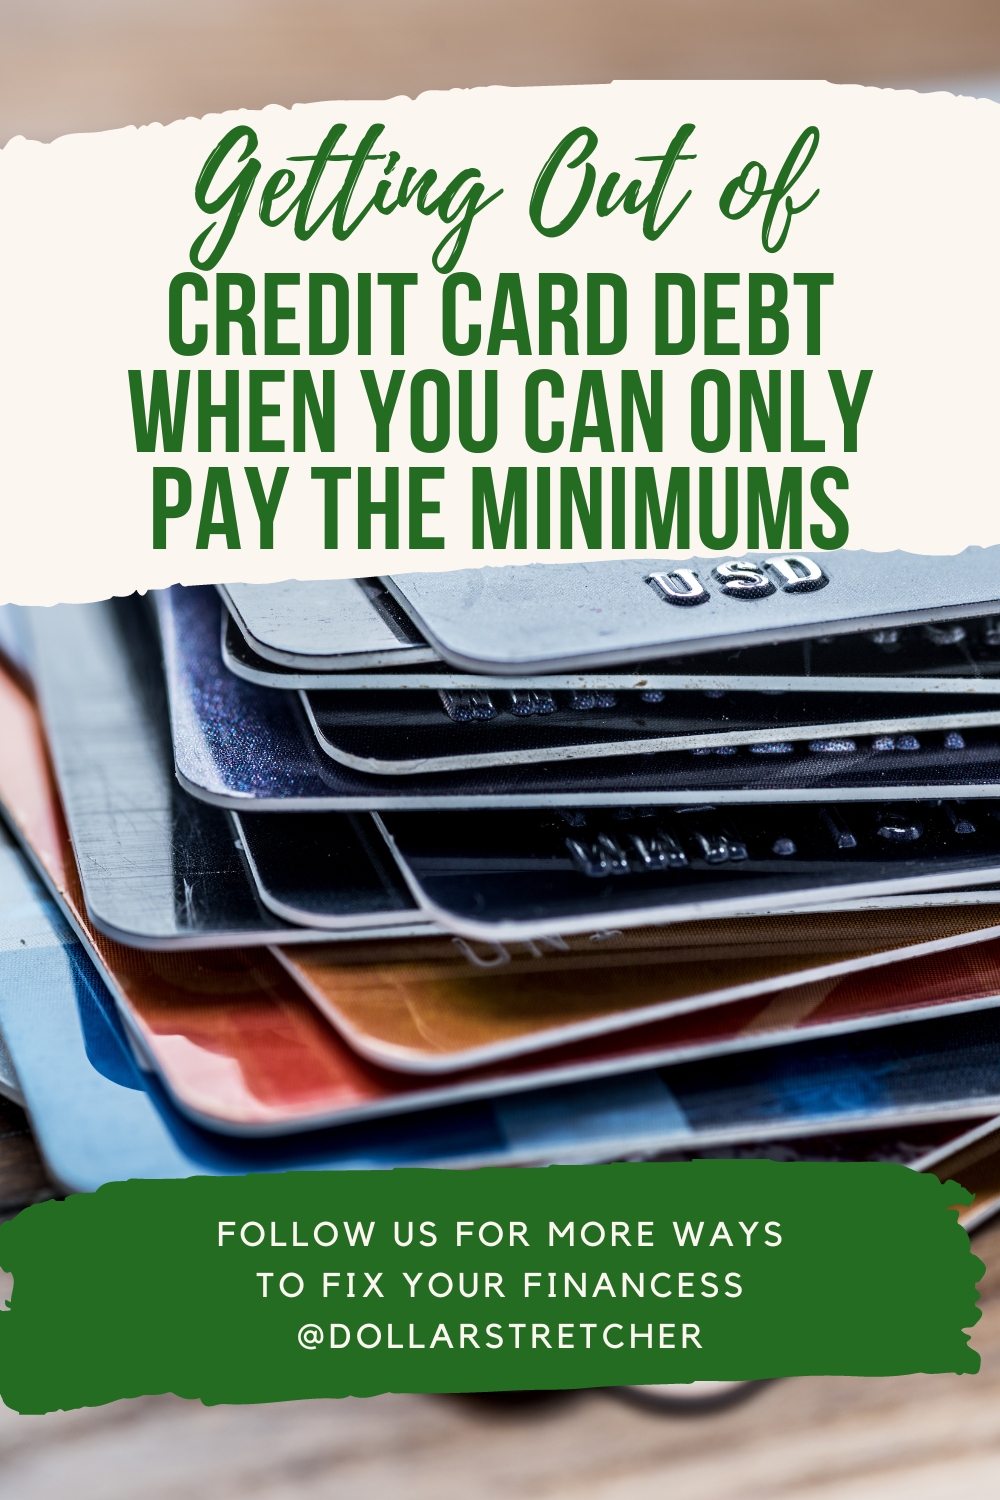 Getting Out of Credit Card Debt photo